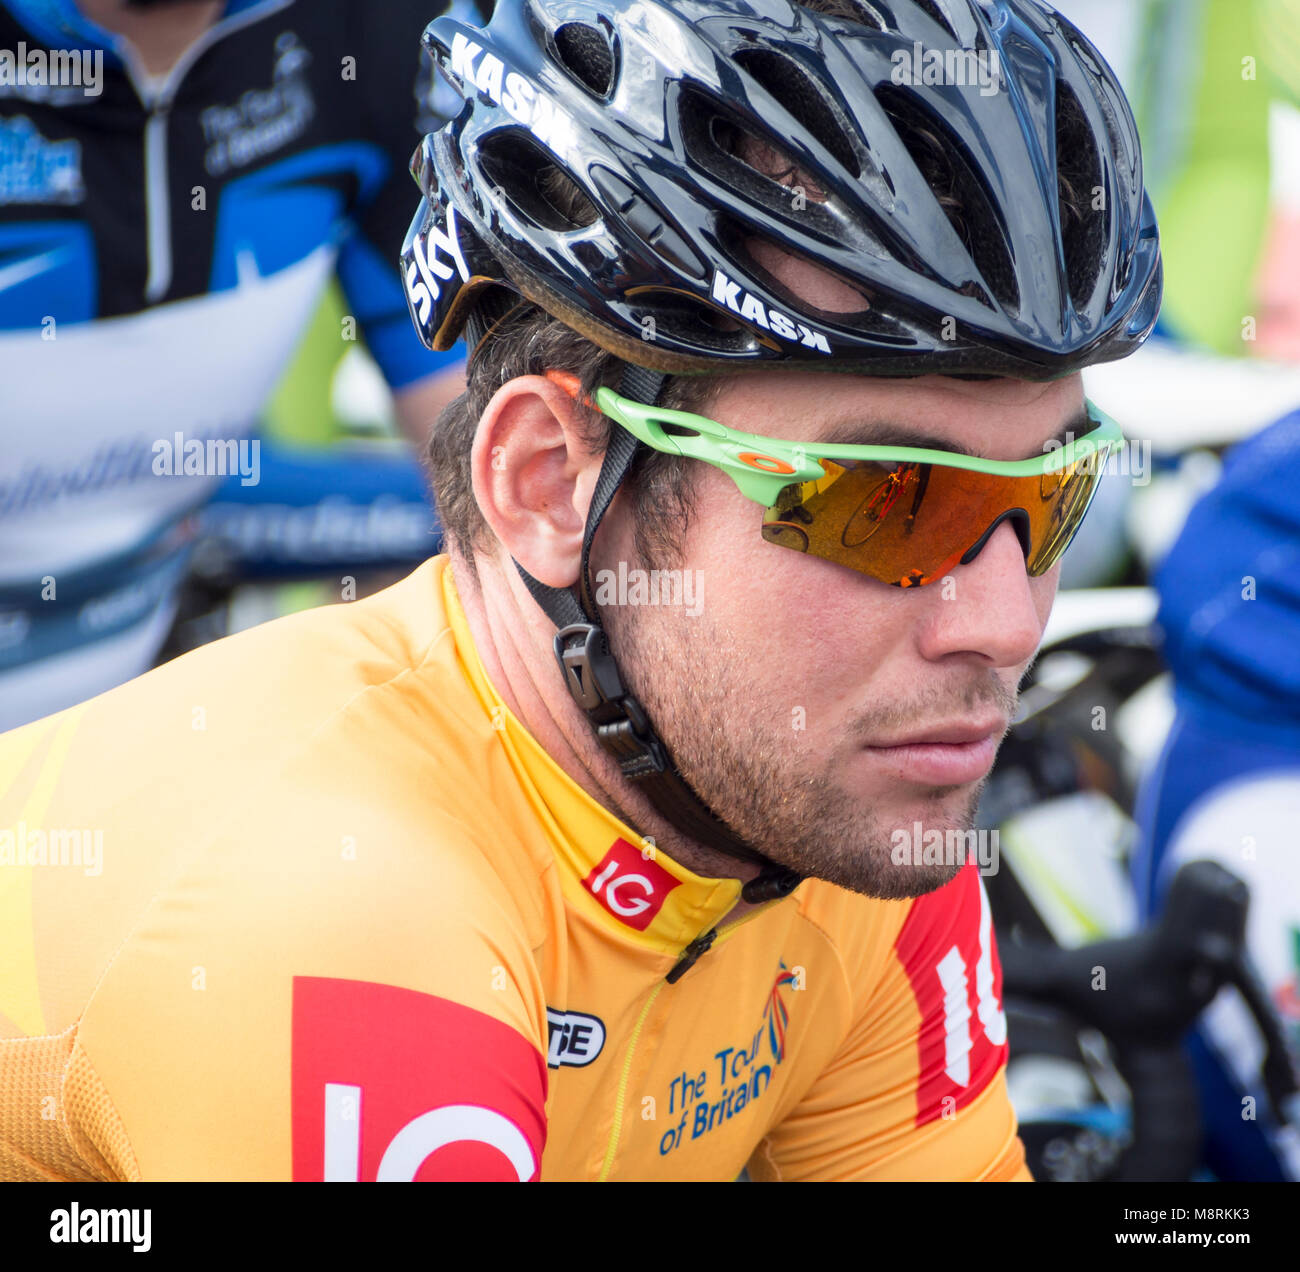 Mark Cavendish, professional road cyclist at the start of the Tour of Britain at Trentham Gardens in Stoke on Trent Staffordshire Stock Photo